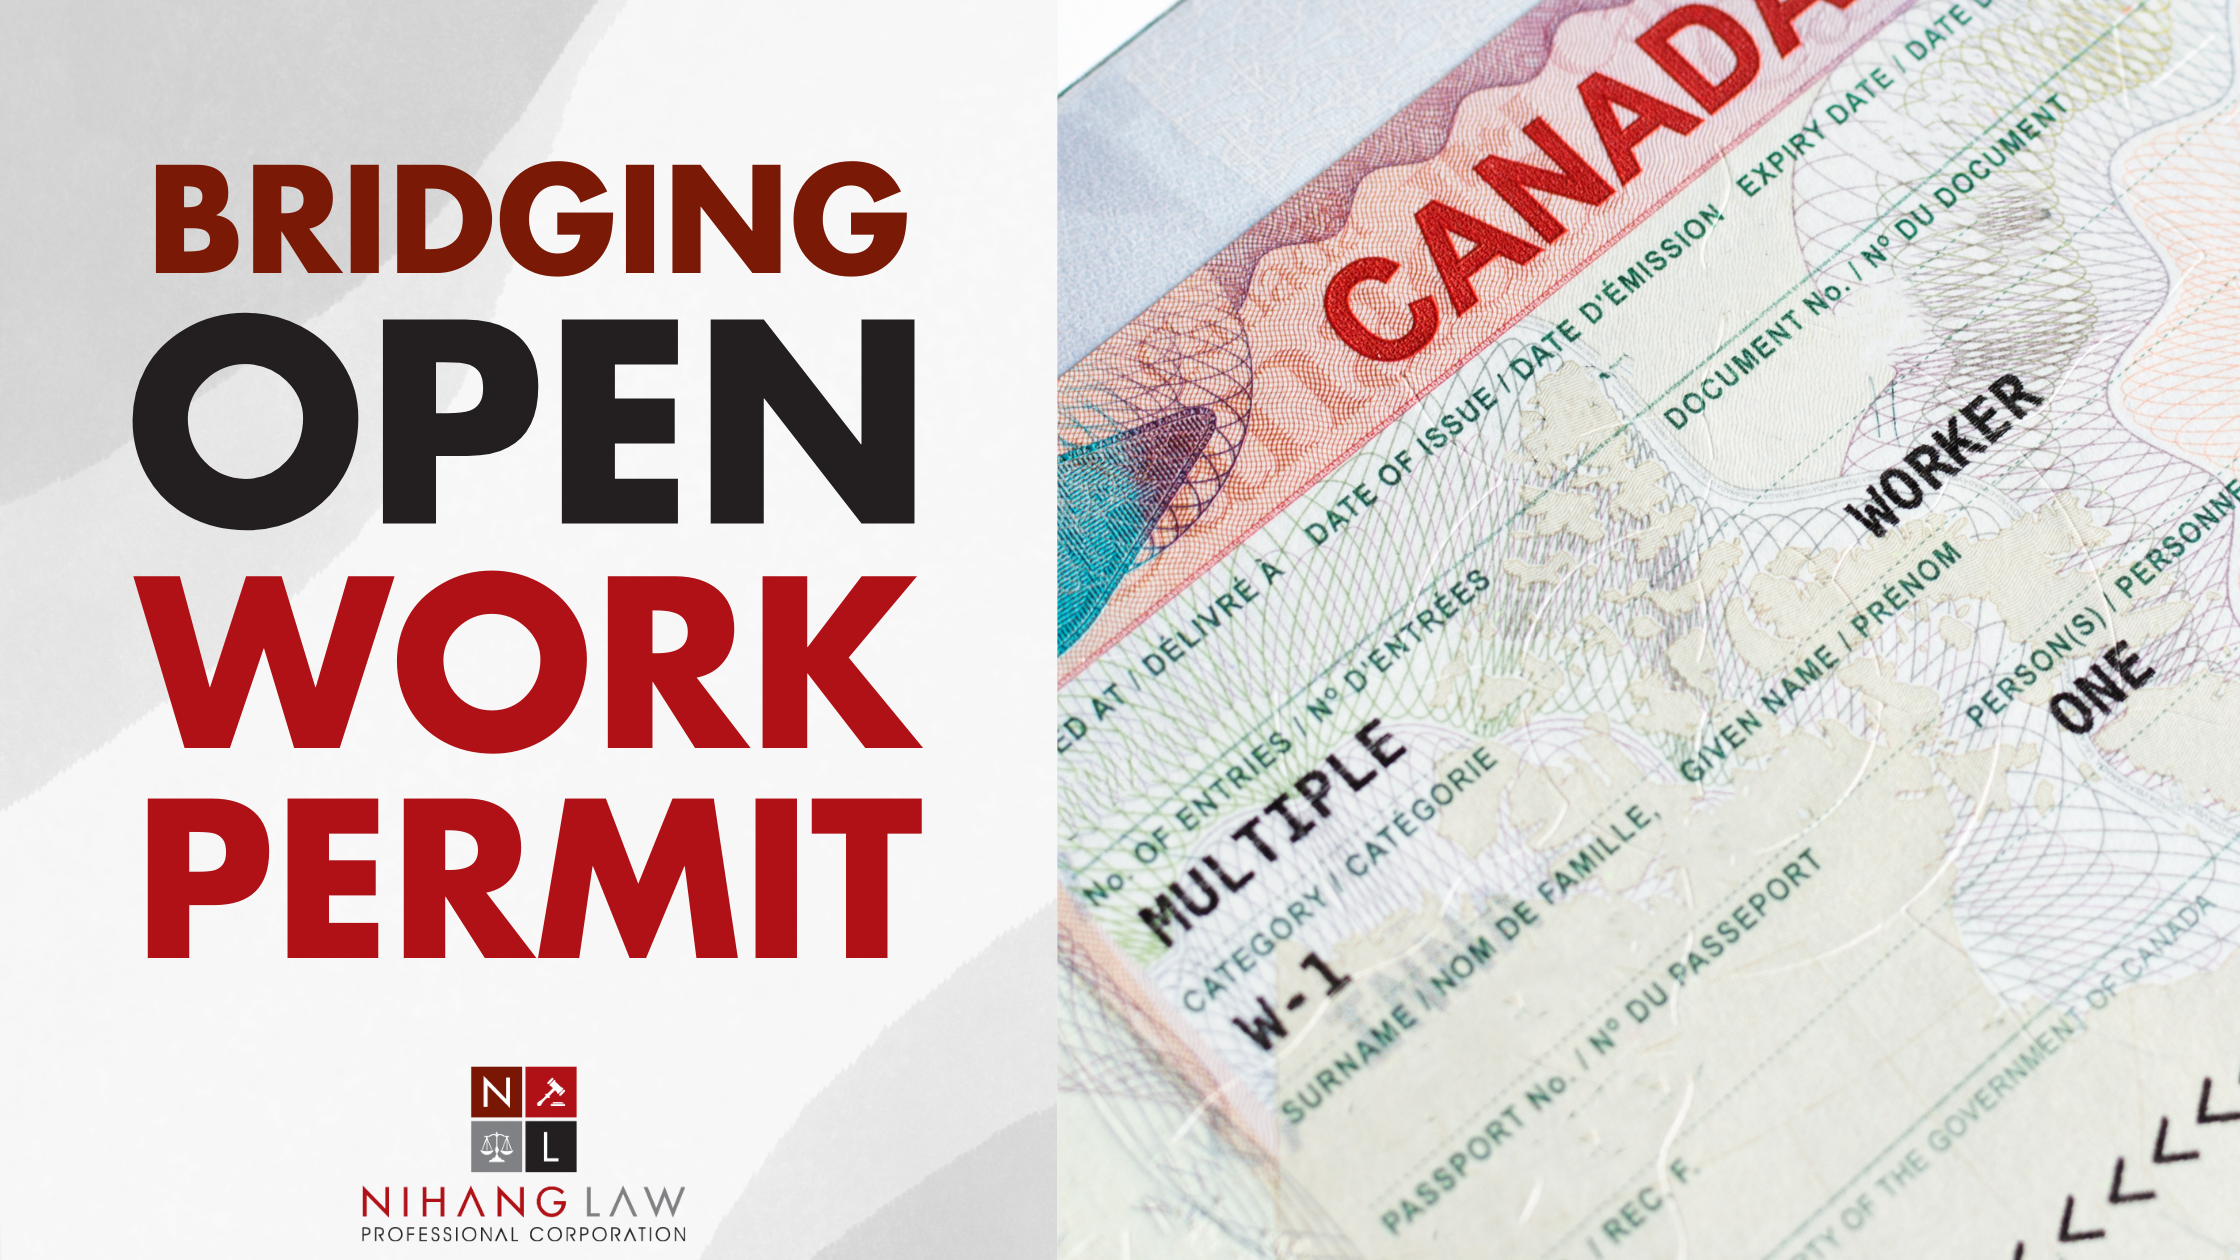 Everything You Need to Know About the Bridging Open Work Permit